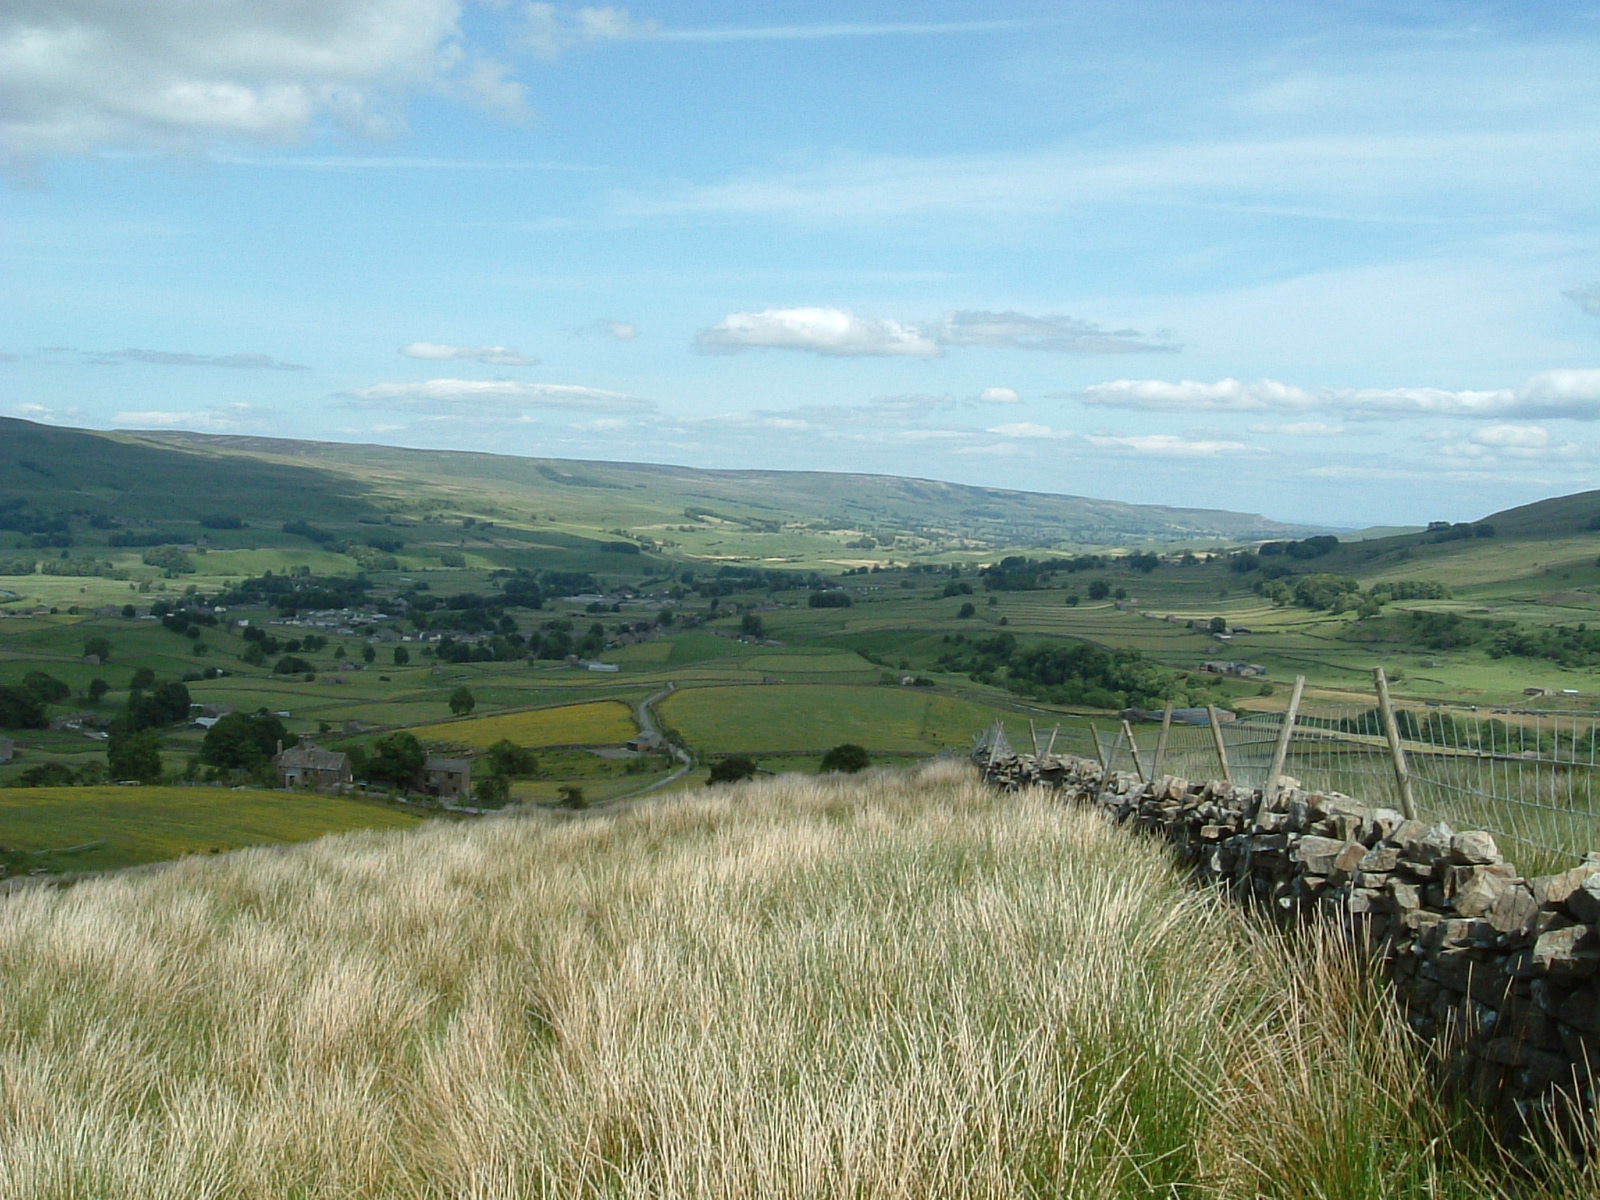 A distant view of Hawes